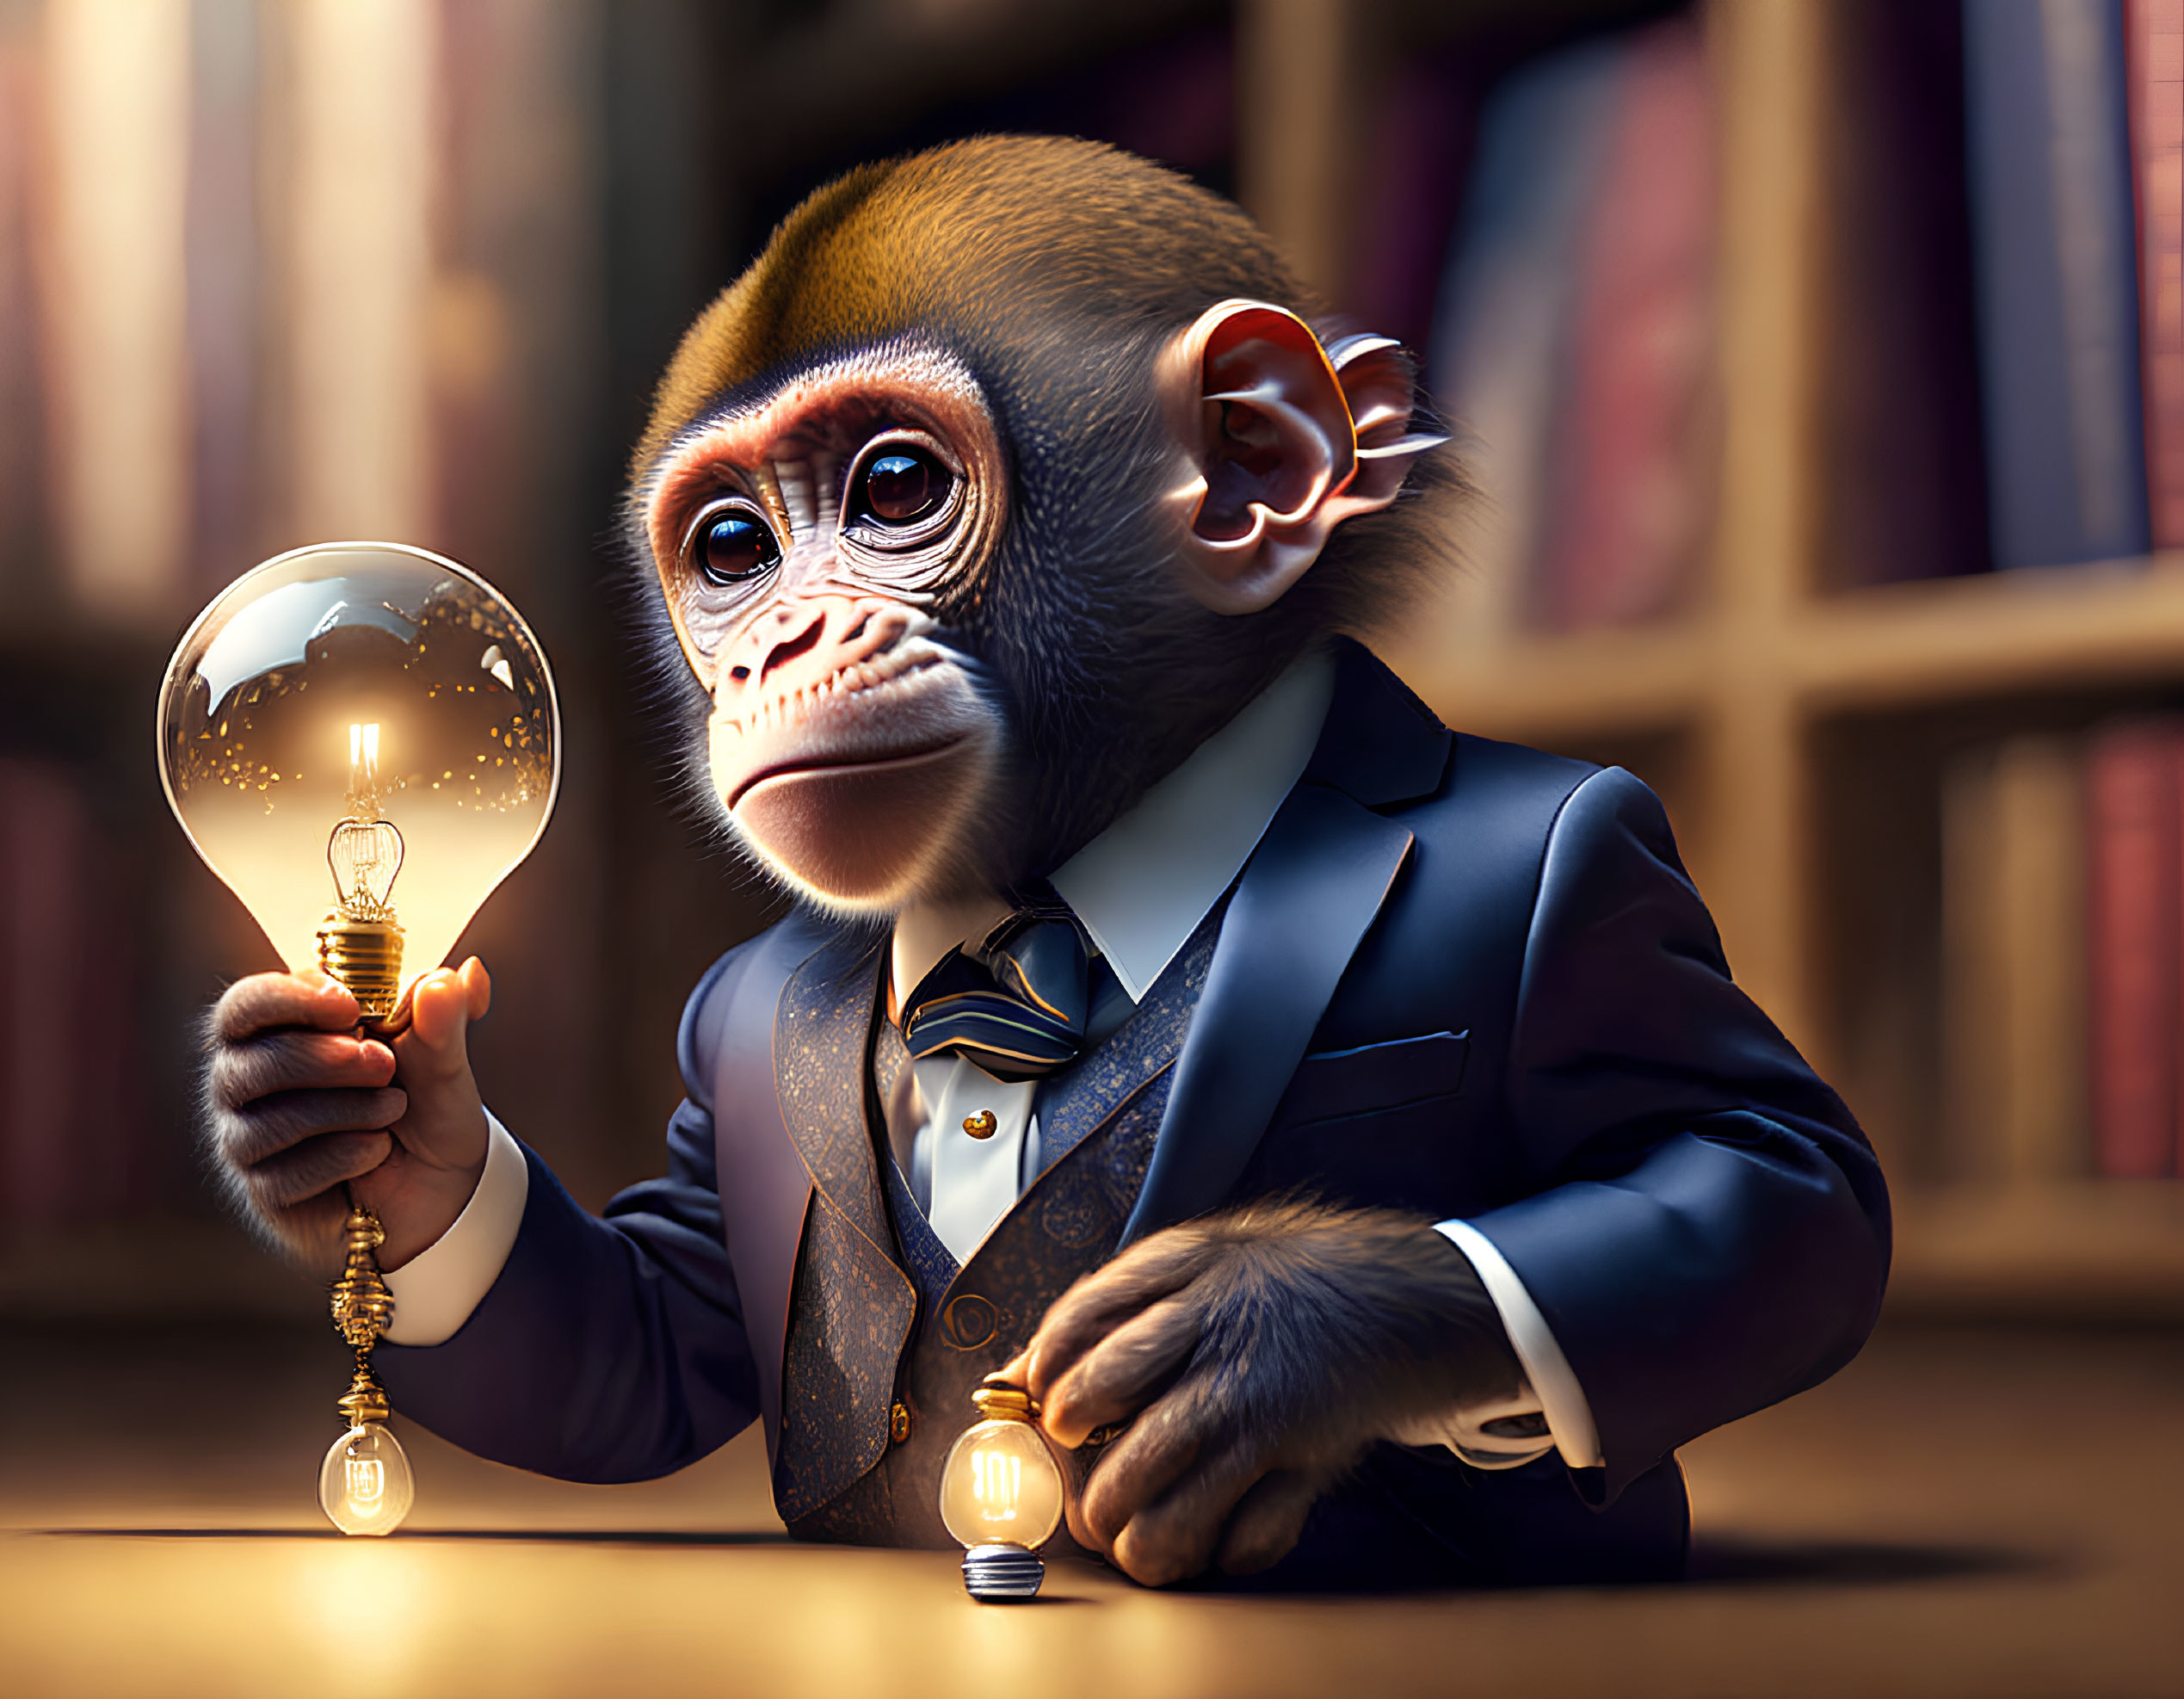 Monkey in Suit Holding Light Bulb in Library Setting